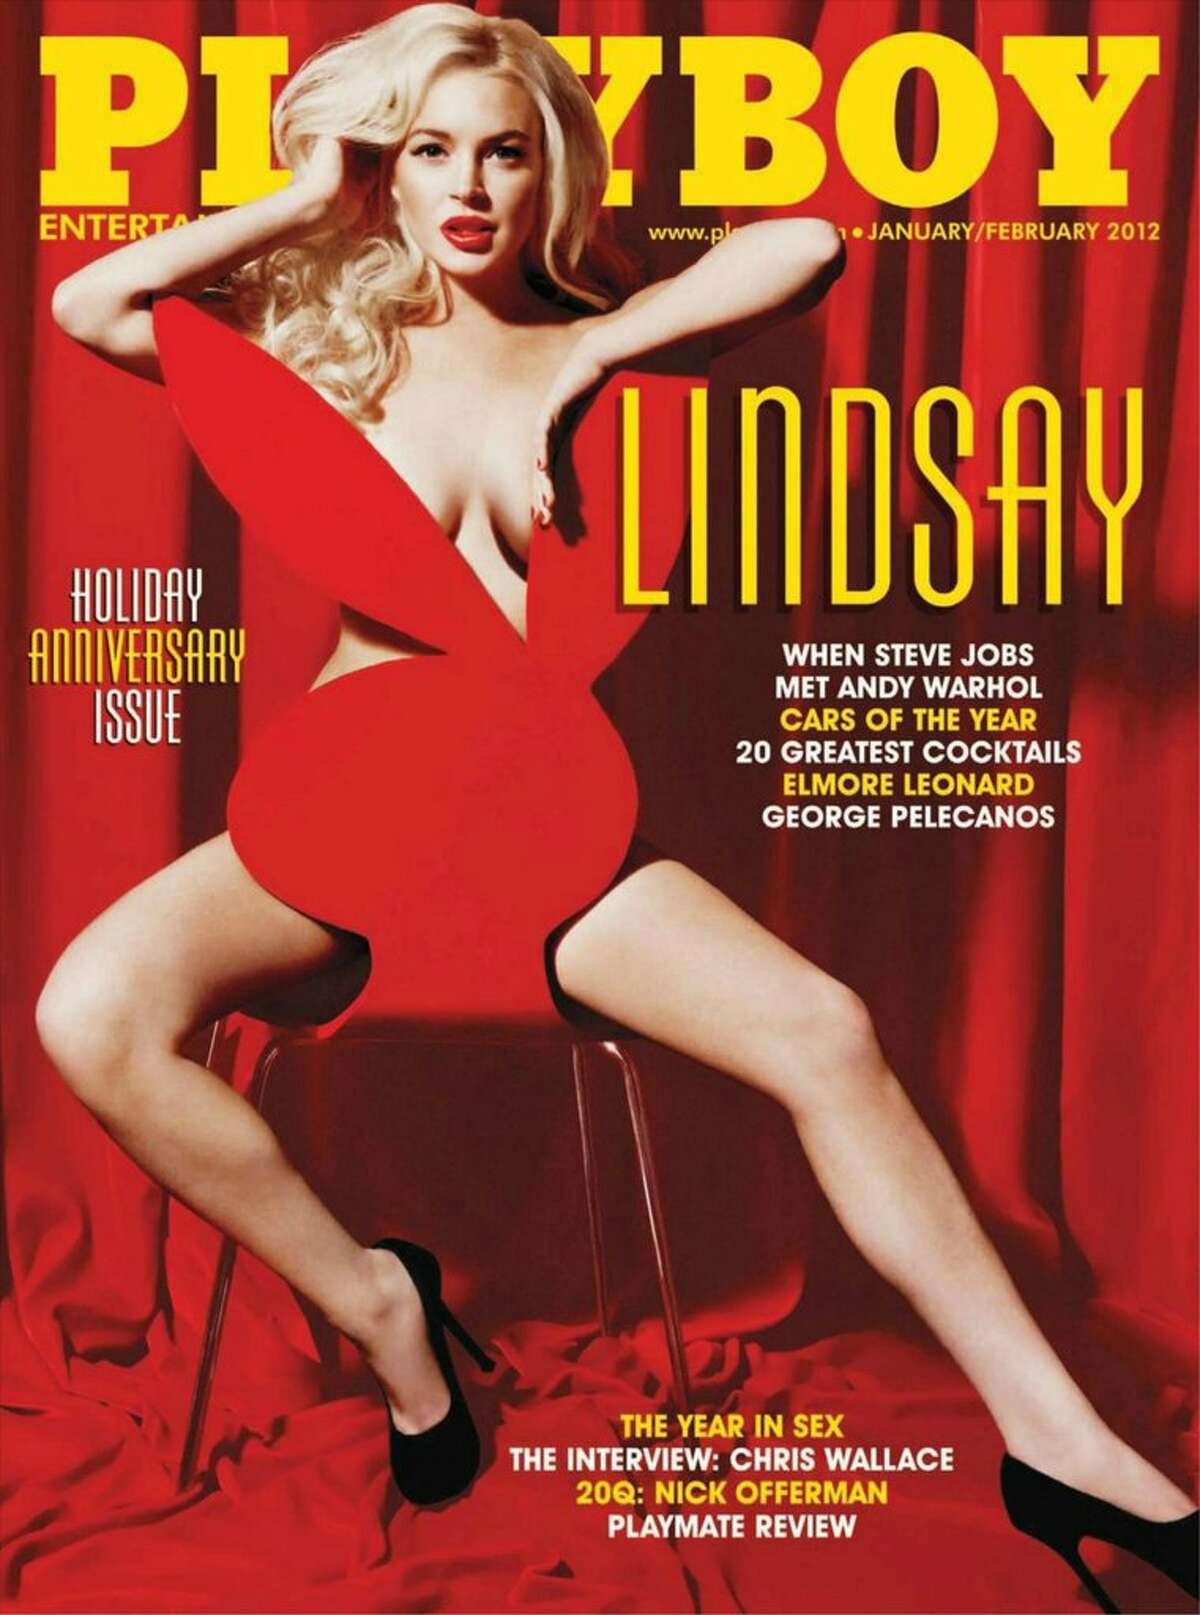 A blonde Lindsey Lohan on the Holiday Anniversary issue. January/February 2012